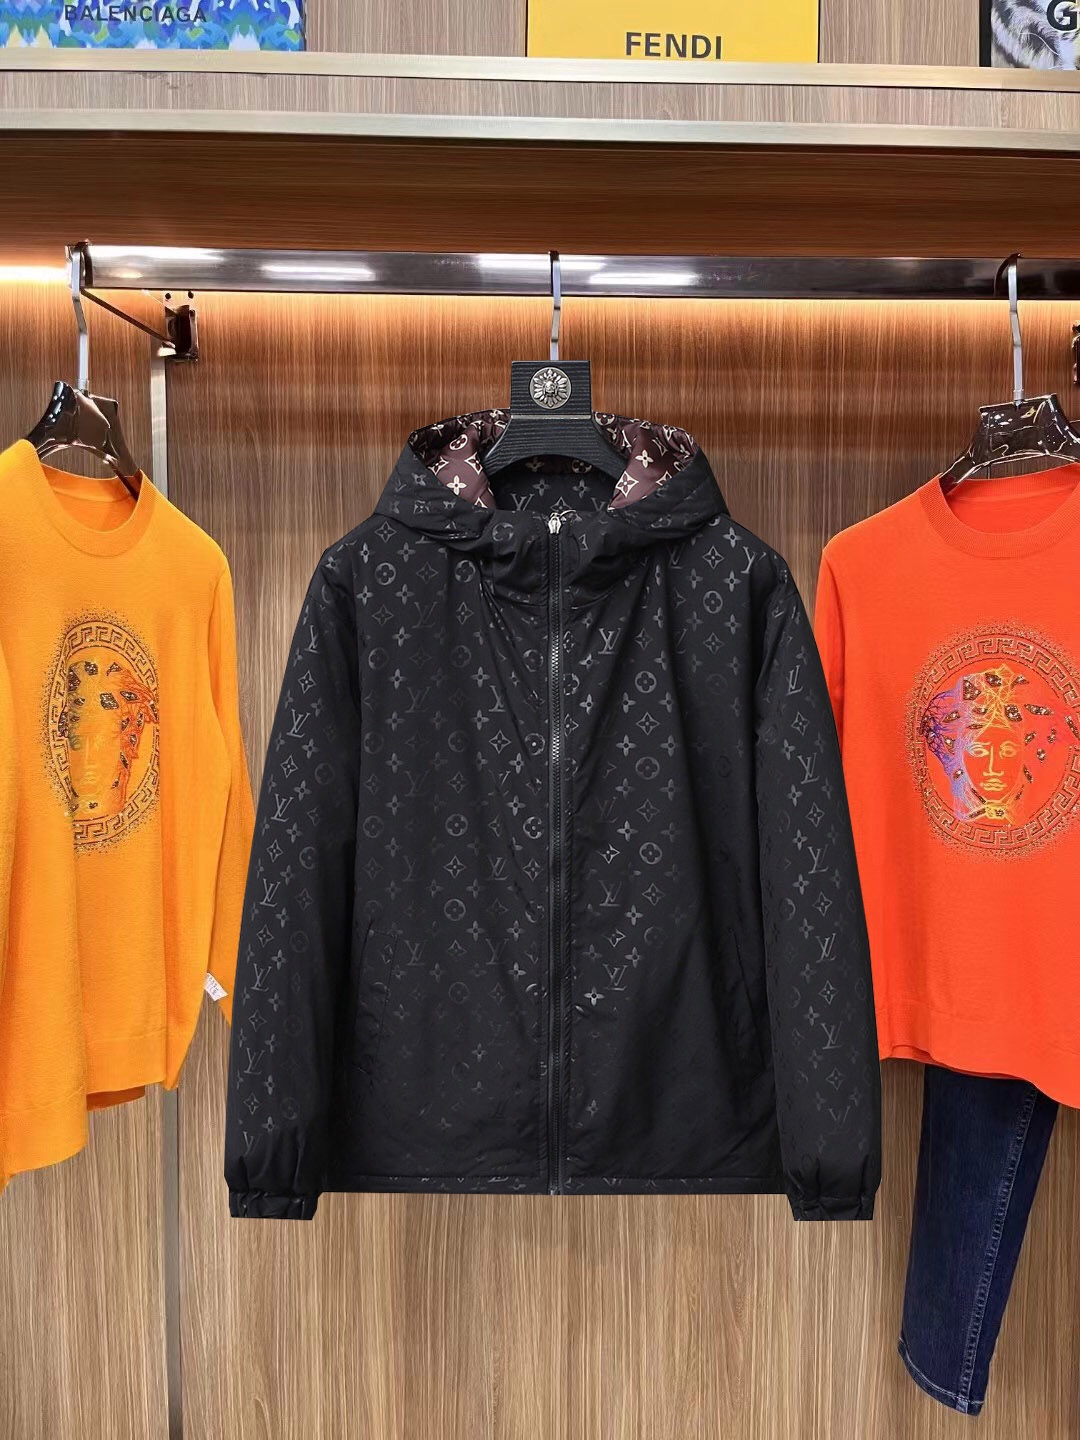 How to buy replica Shop
 Louis Vuitton Good
 Clothing Coats & Jackets Cotton Winter Collection